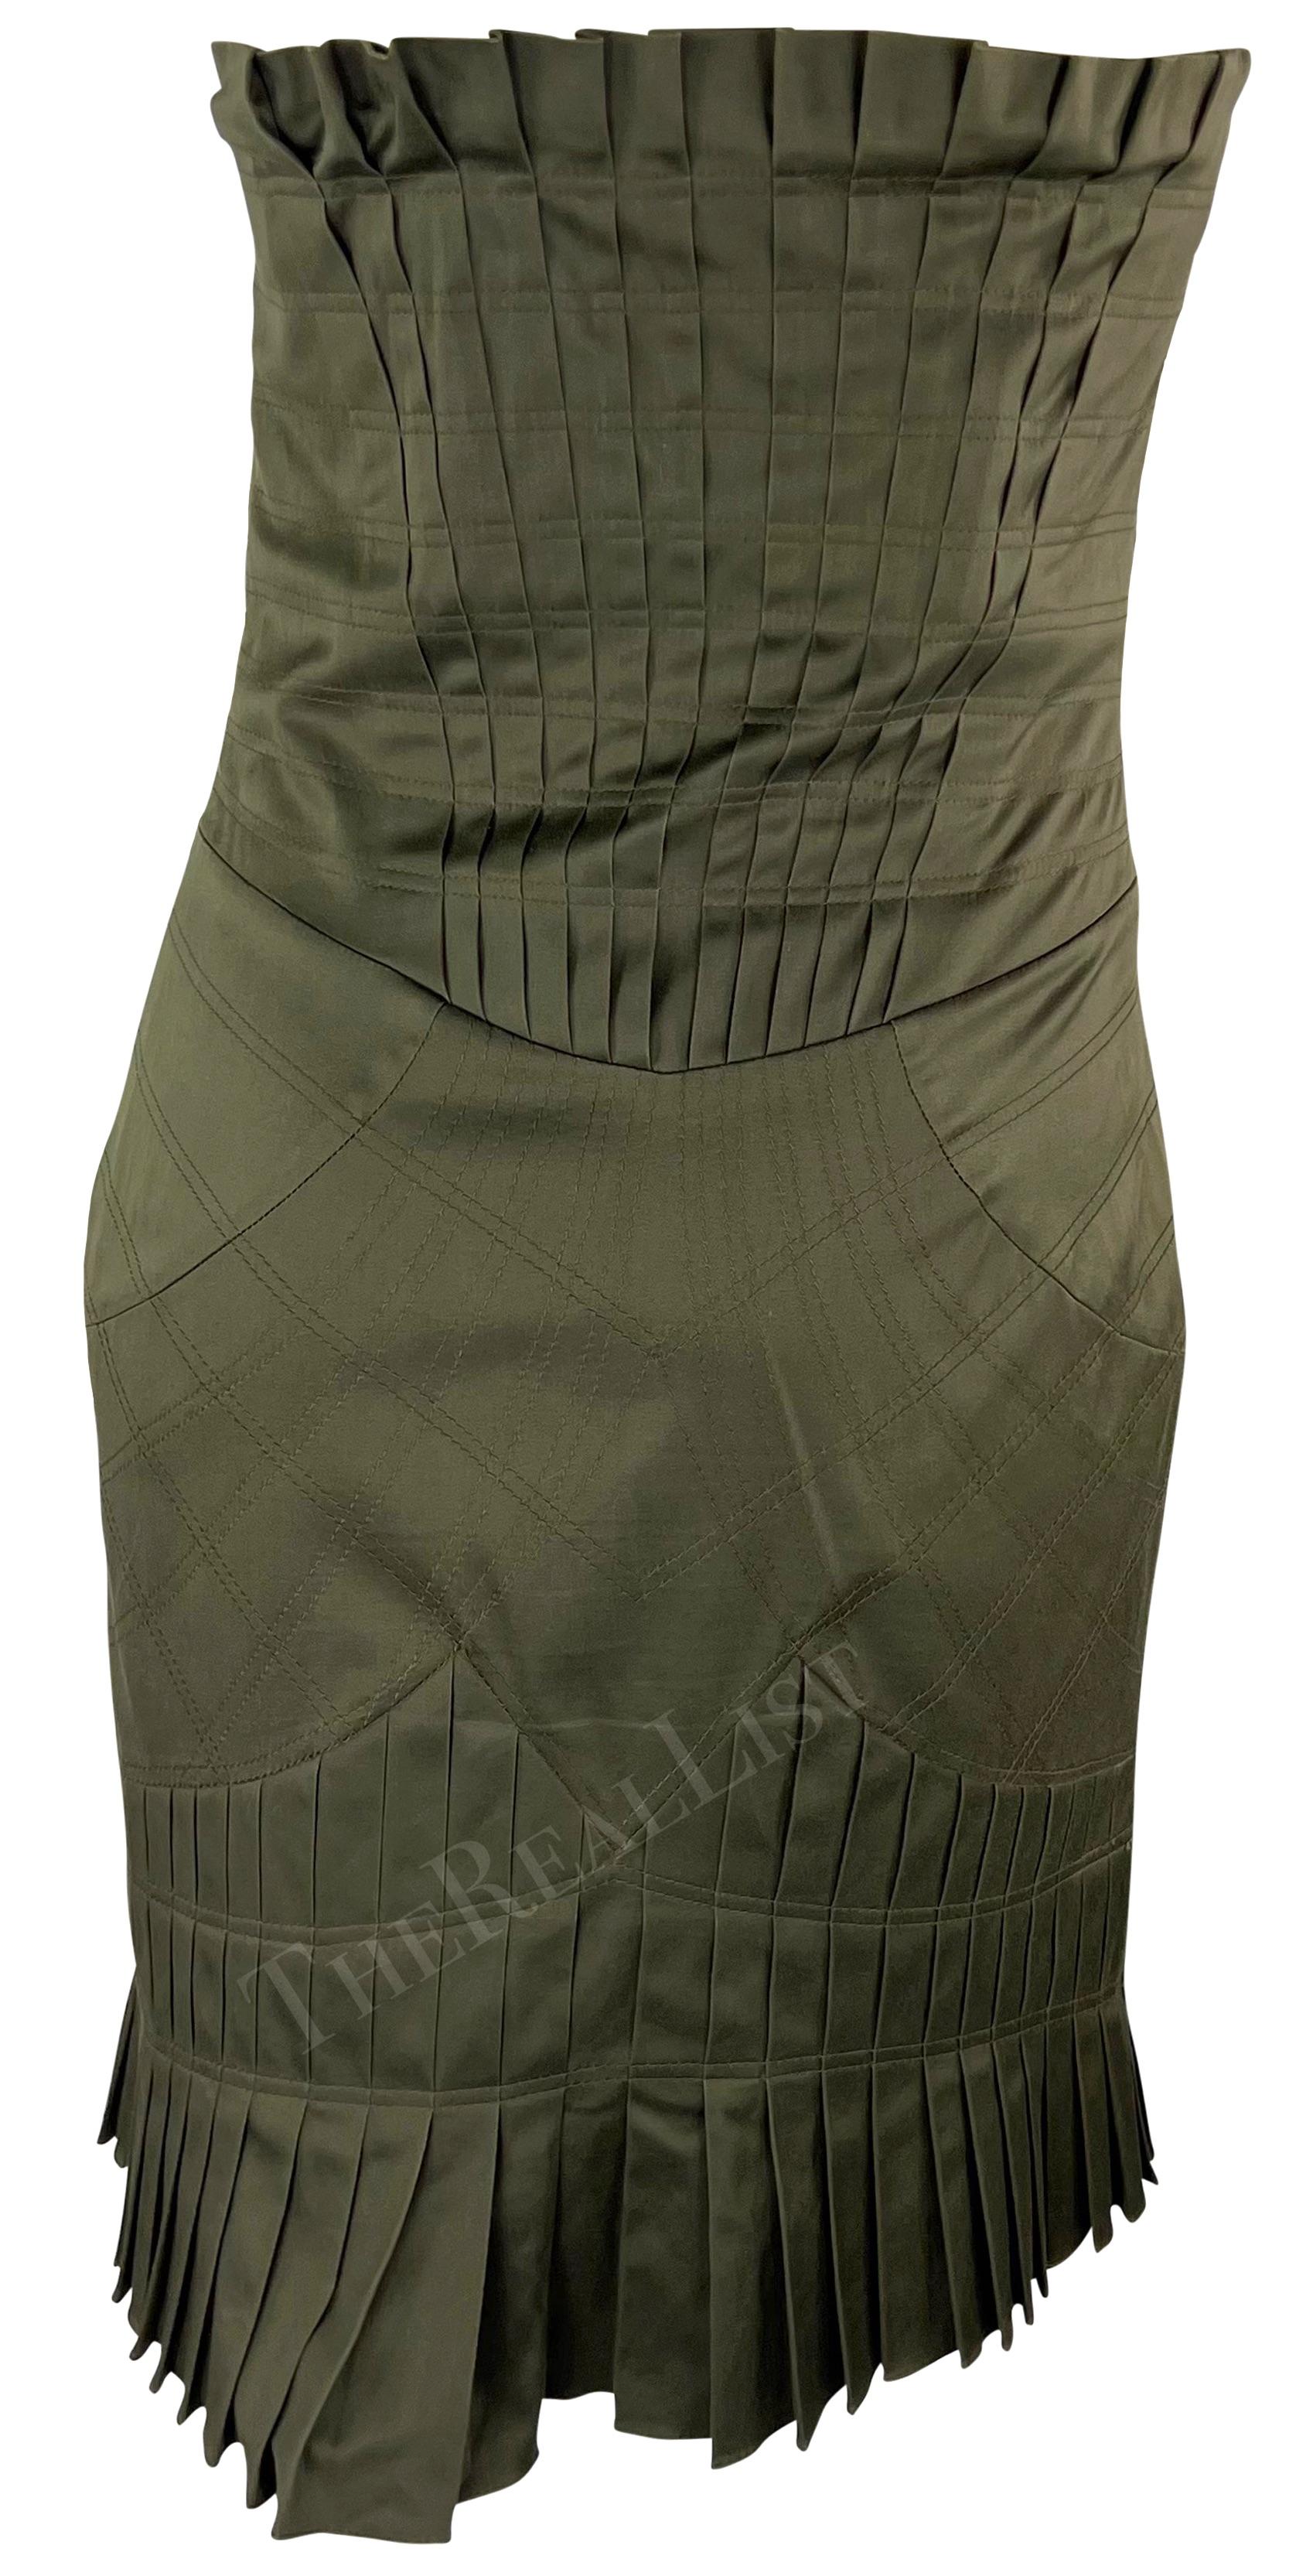 Women's S/S 2004 Gucci by Tom Ford Olive Green Fan Pleated Strapless Mini Dress For Sale